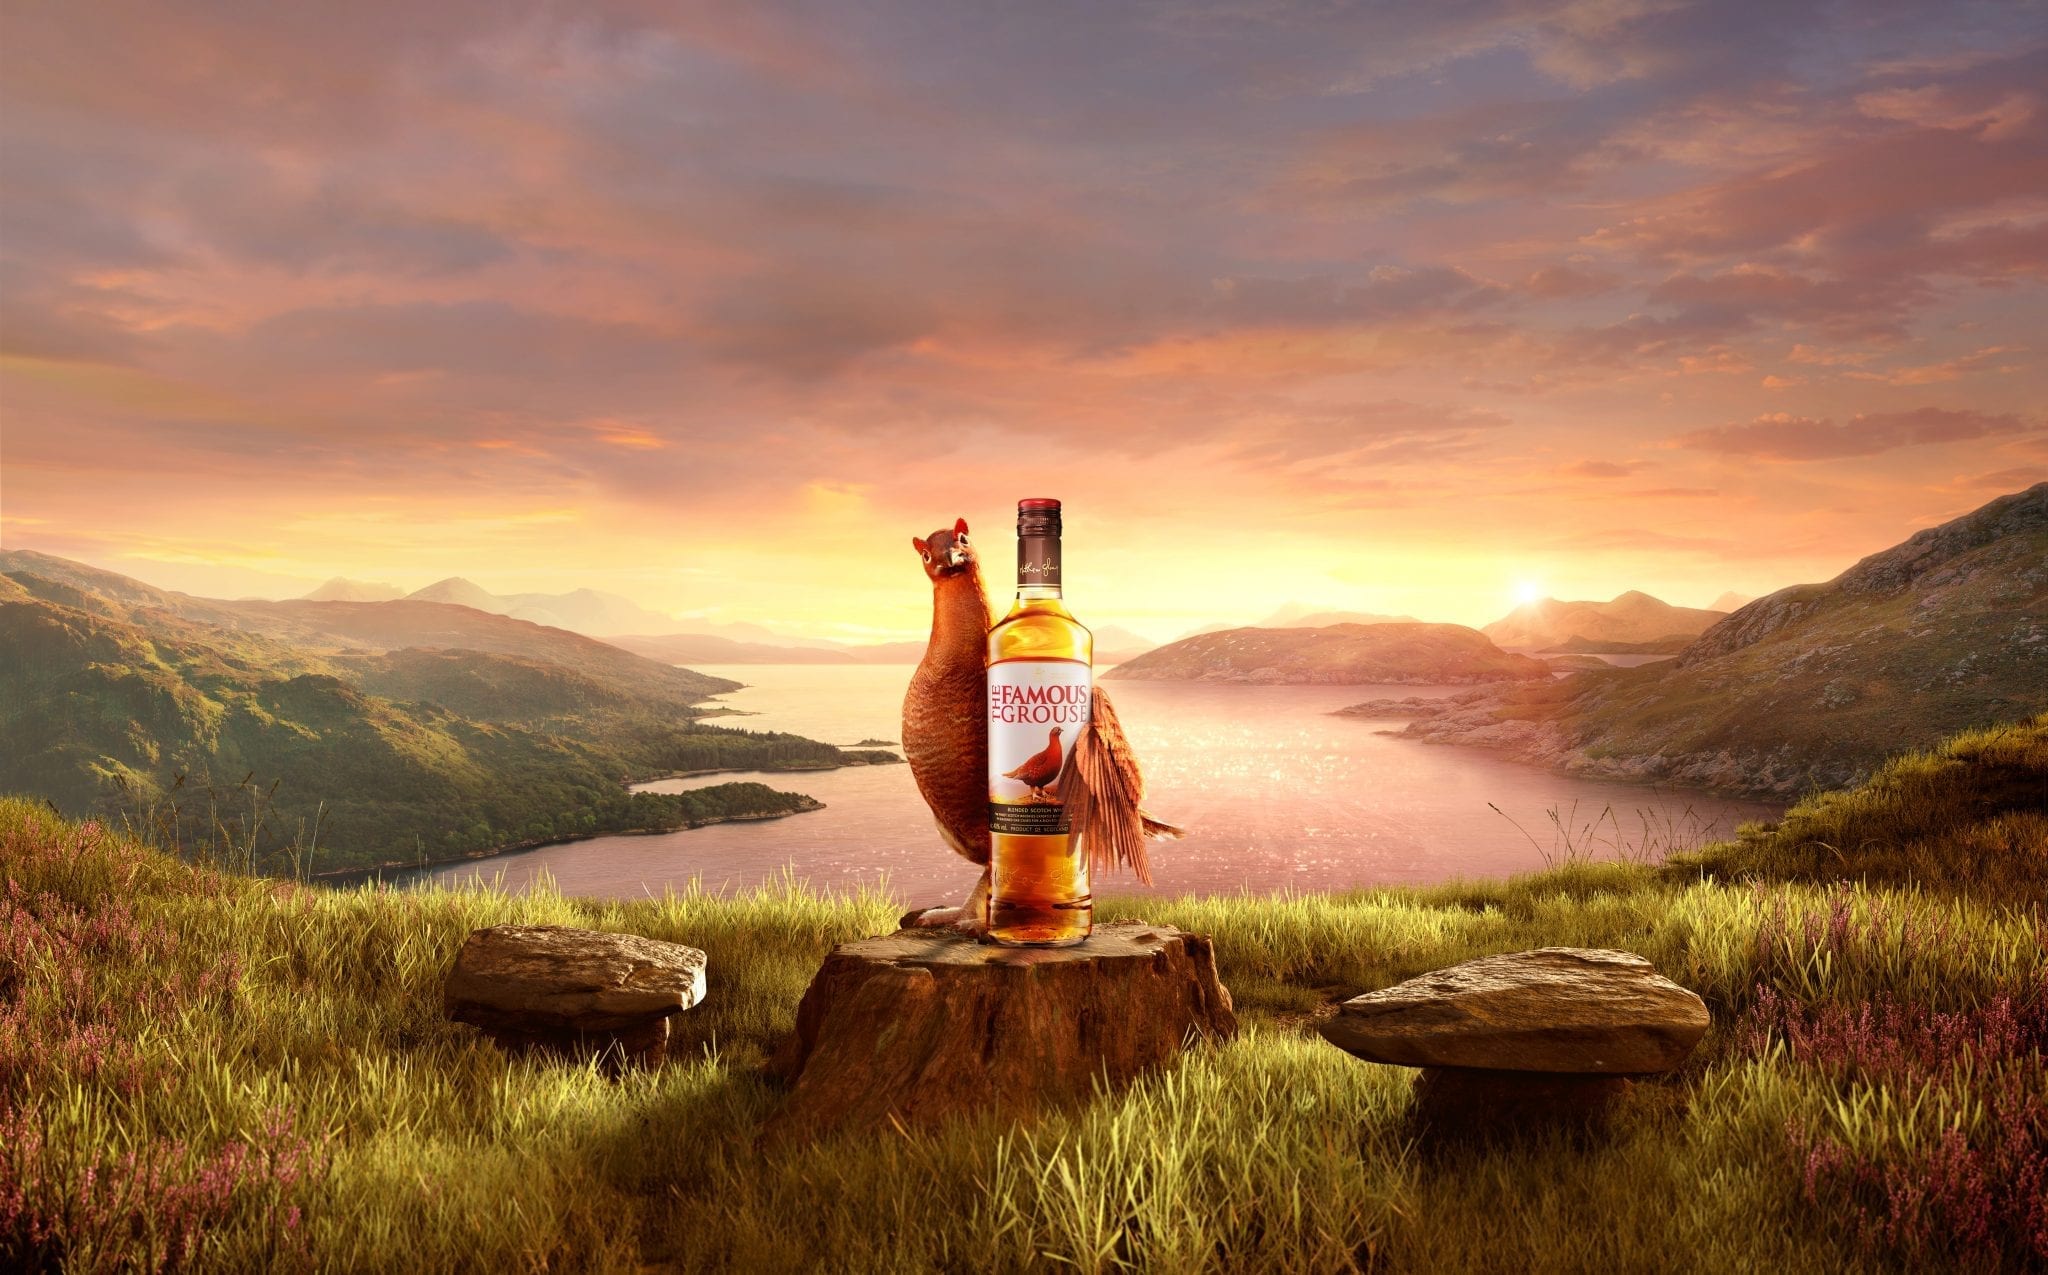 the Famous Grousewhiskey Blogger Stuart Mcnamara the Famous Grouse Overtakes Jack Daniels to Become Britains No1 Whisky by Value Sales of the Famous Grouse Topped £71m over Christmas International Whiskey Reviews by Irish Whiskey Blogger Stuart Mcnamara